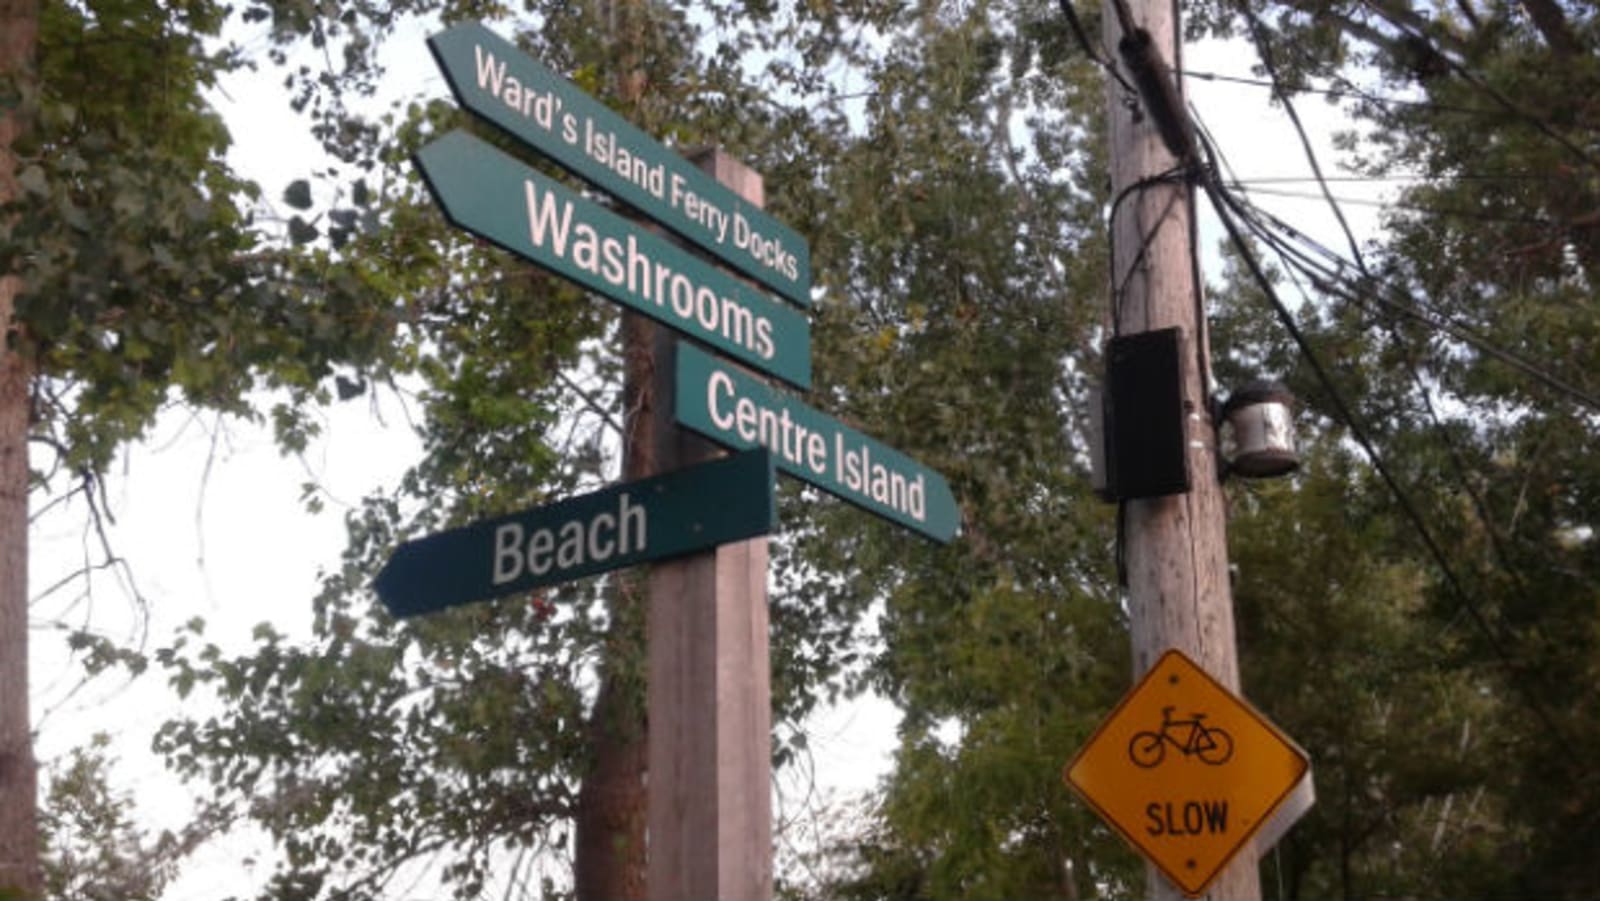 Wards Island Signpost pointing to important locations, such as beach, and washrooms